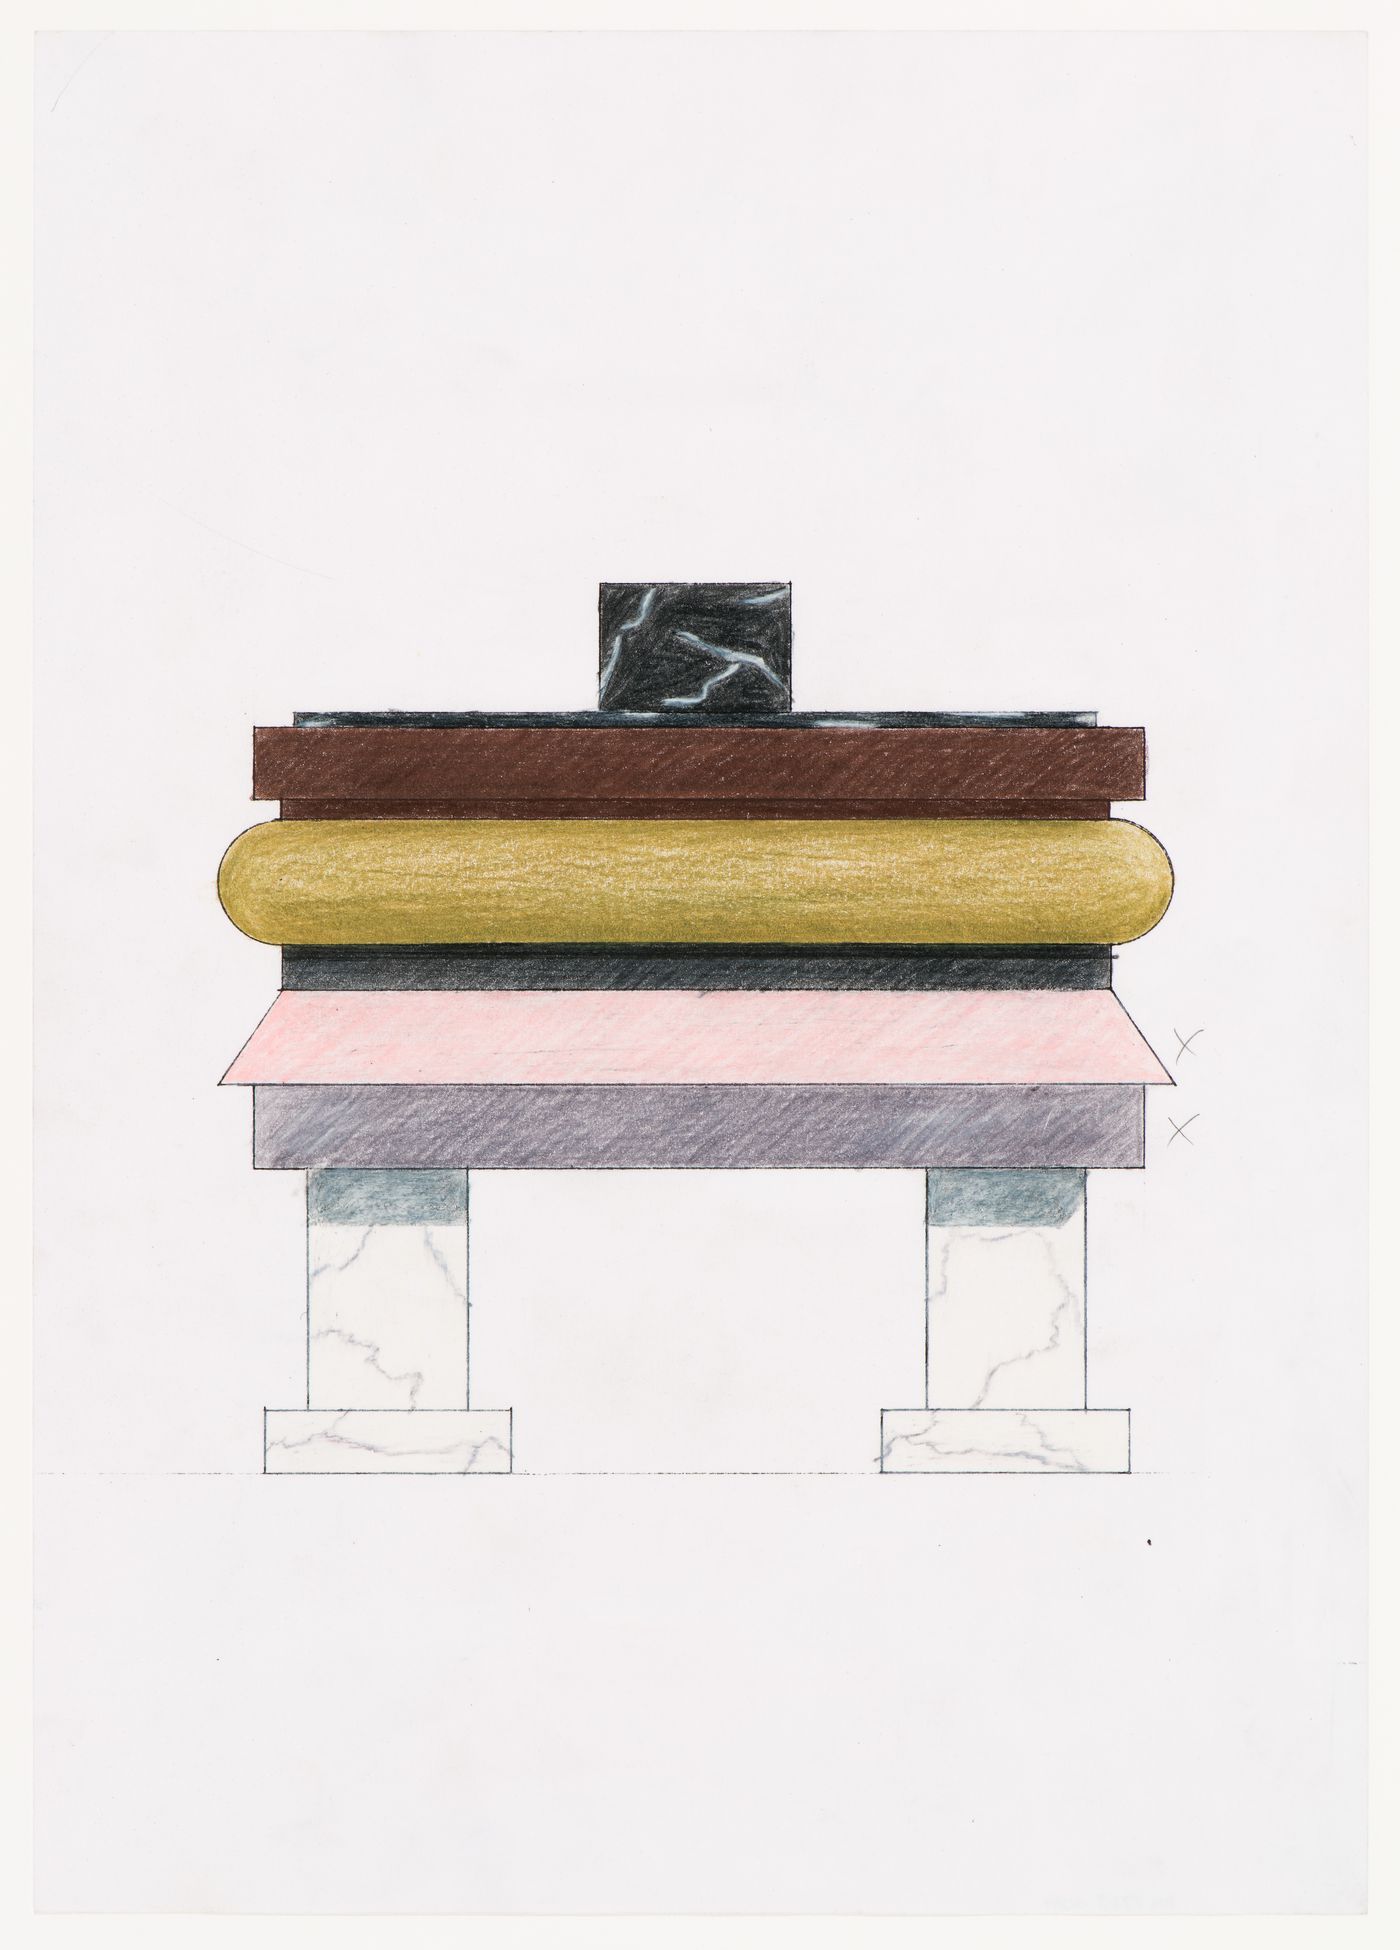 Elevation of a design for a table for the Shaughnessy House, Centre Canadien d'Architecture, Montréal